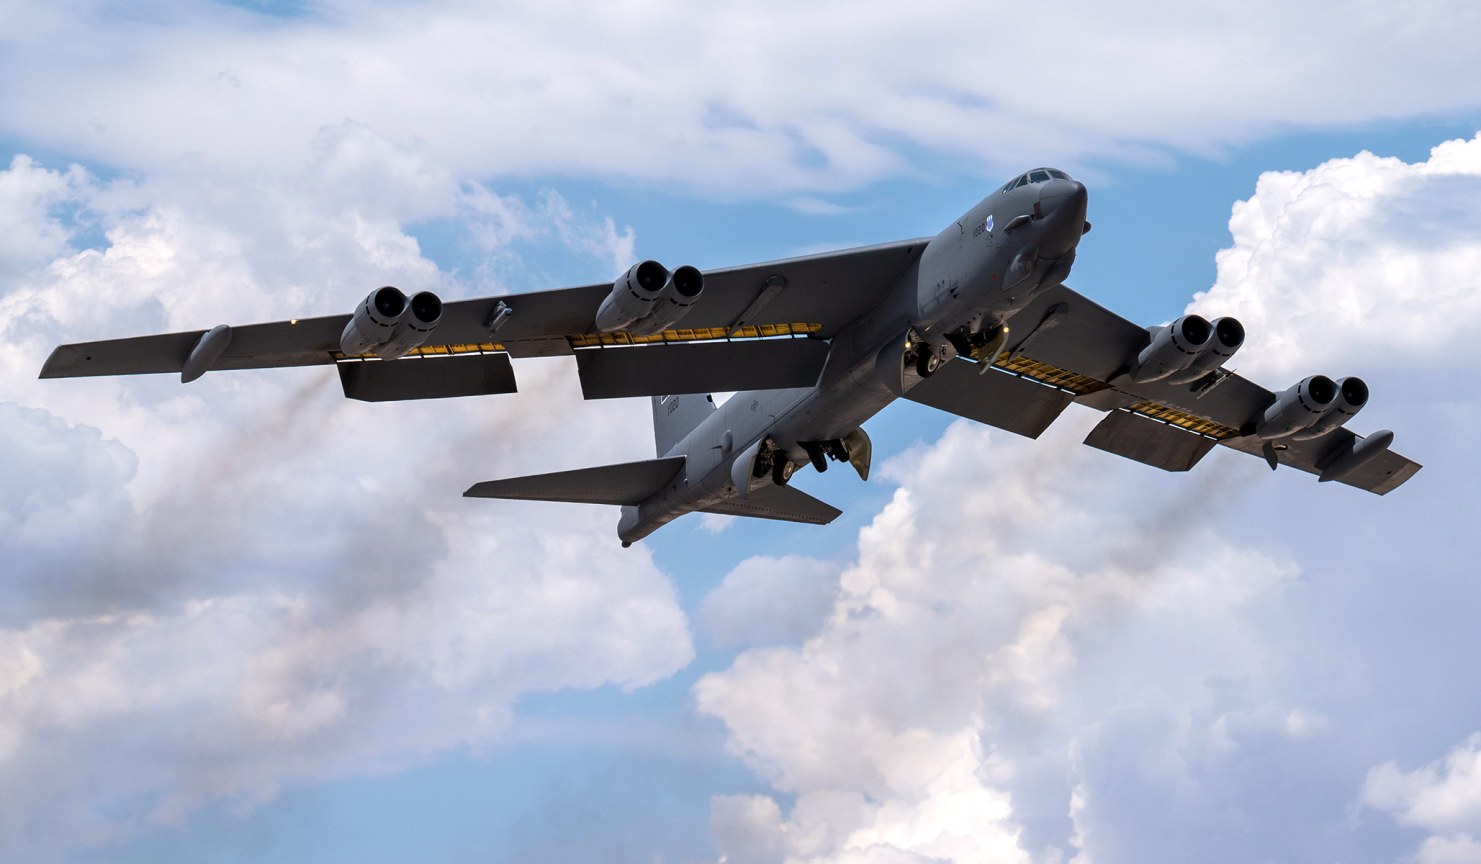 US Air Force to spend $11bn to upgrade B-52H - bomber to get F130 engine, radar and be able to carry new nuclear missile with range of 2,400km